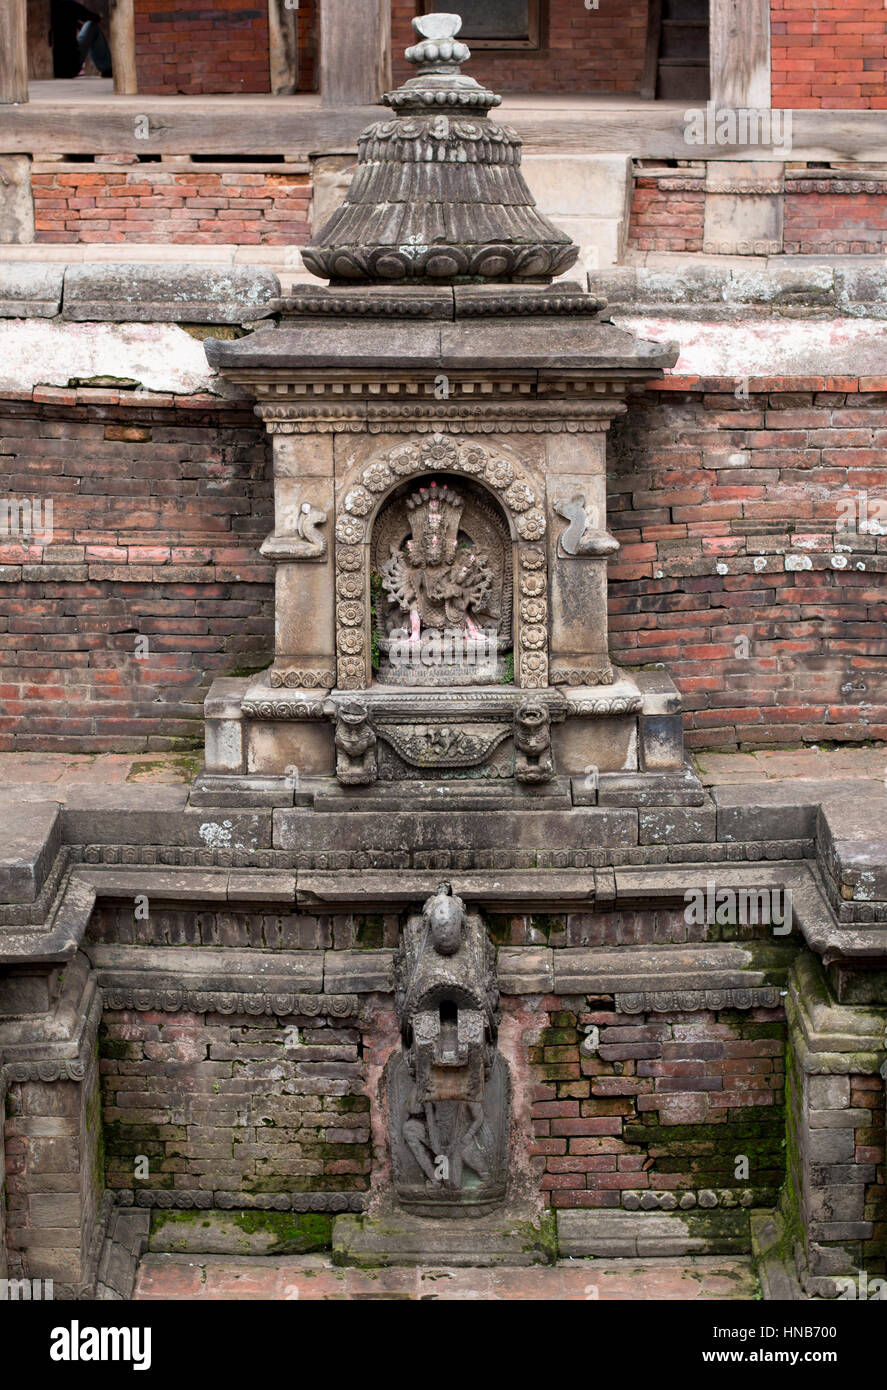 Stone carving of Vishnu, a Hindu god, in a temple in Bhaktapur, Kathmandu, next to the water pond Stock Photo